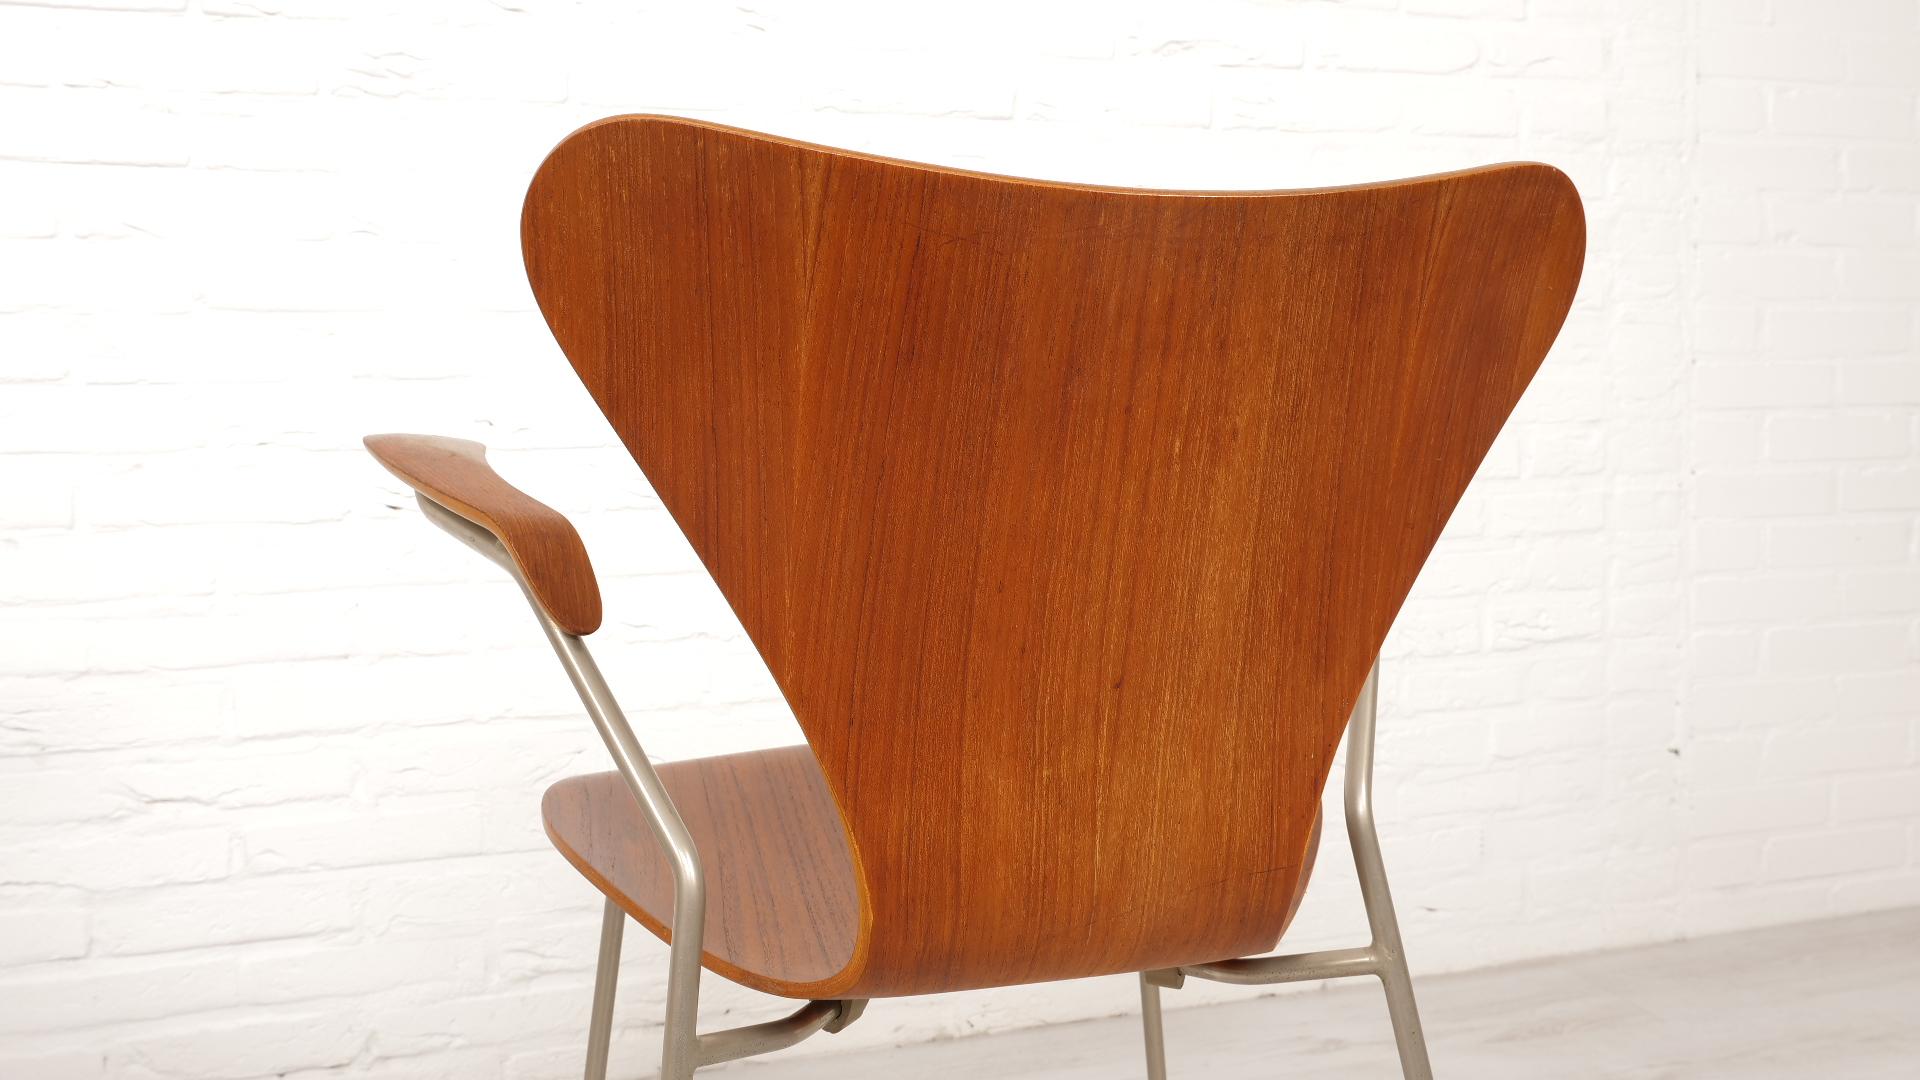 2 Vintage butterfly chairs with armrests by Arne Jacobsen model 3207 Teak For Sale 11